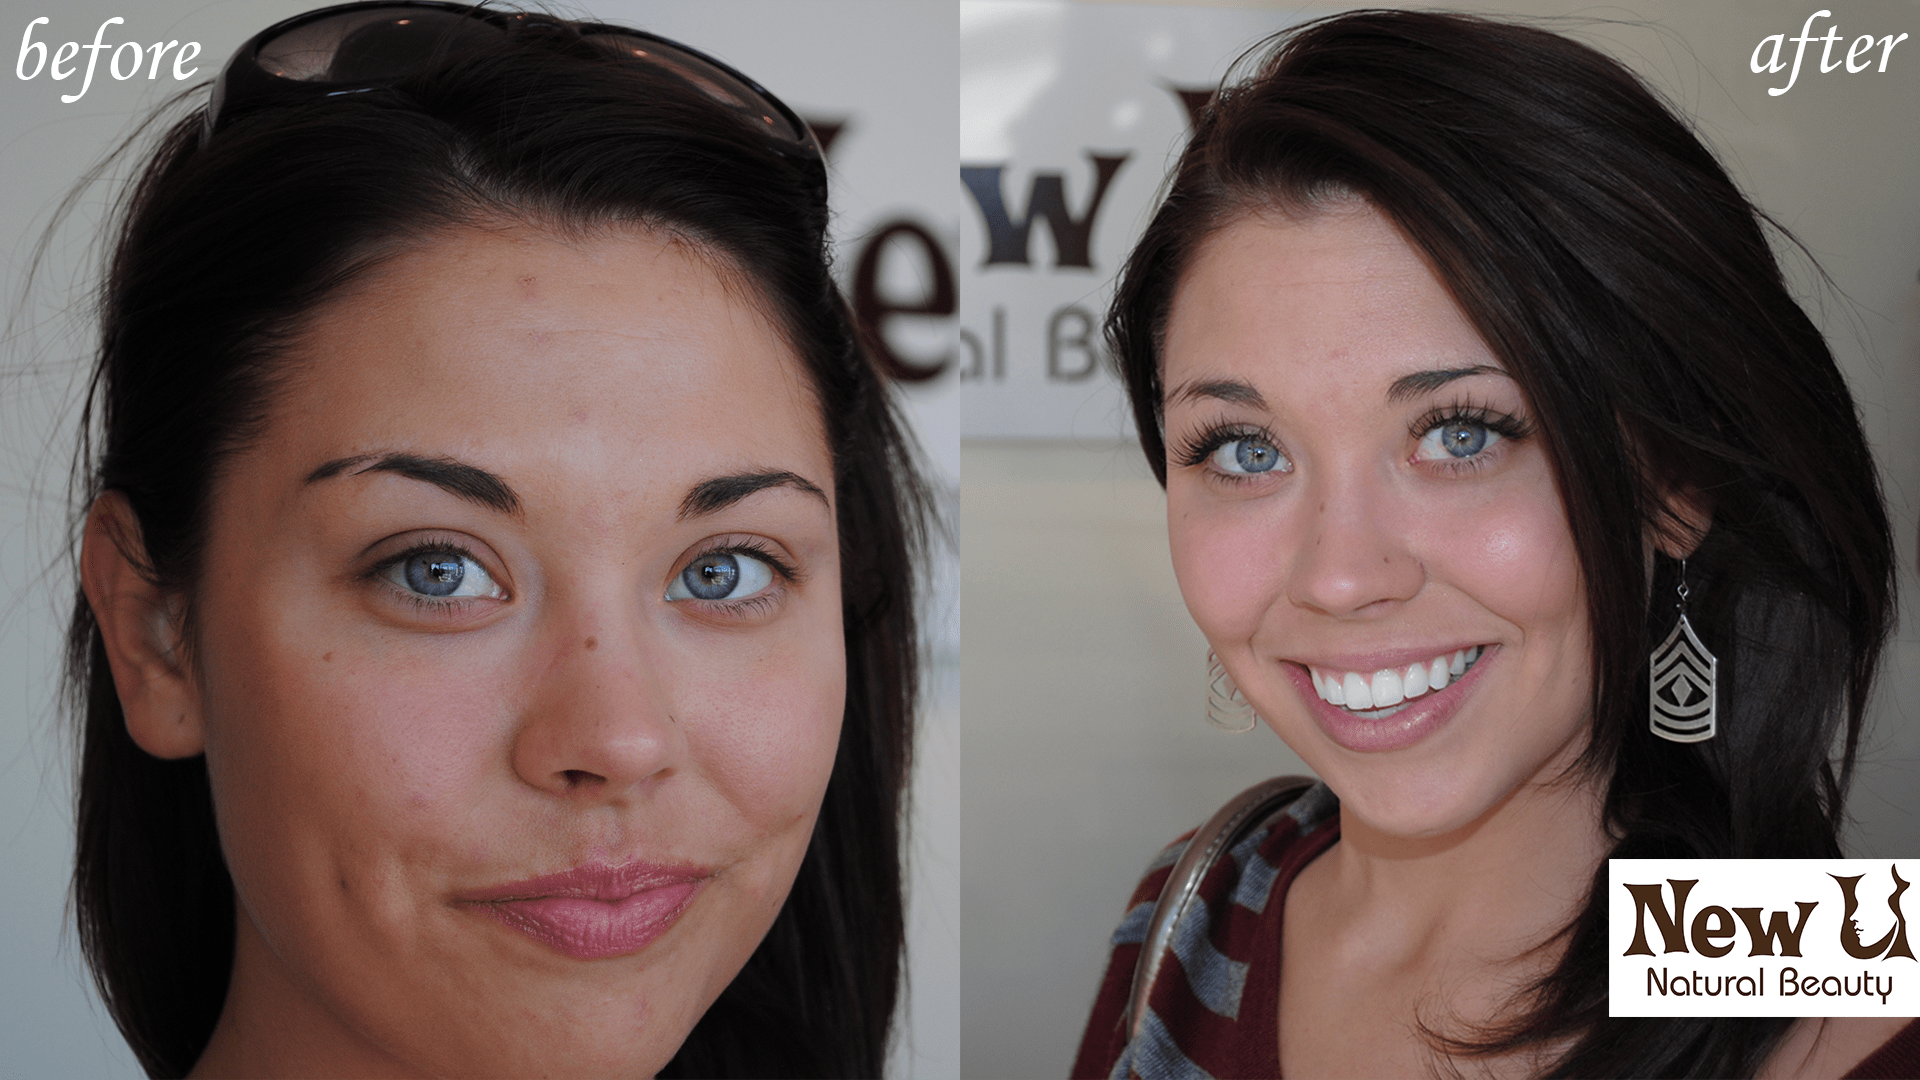 Eyelash Extensions 1 Las Vegas Before and After